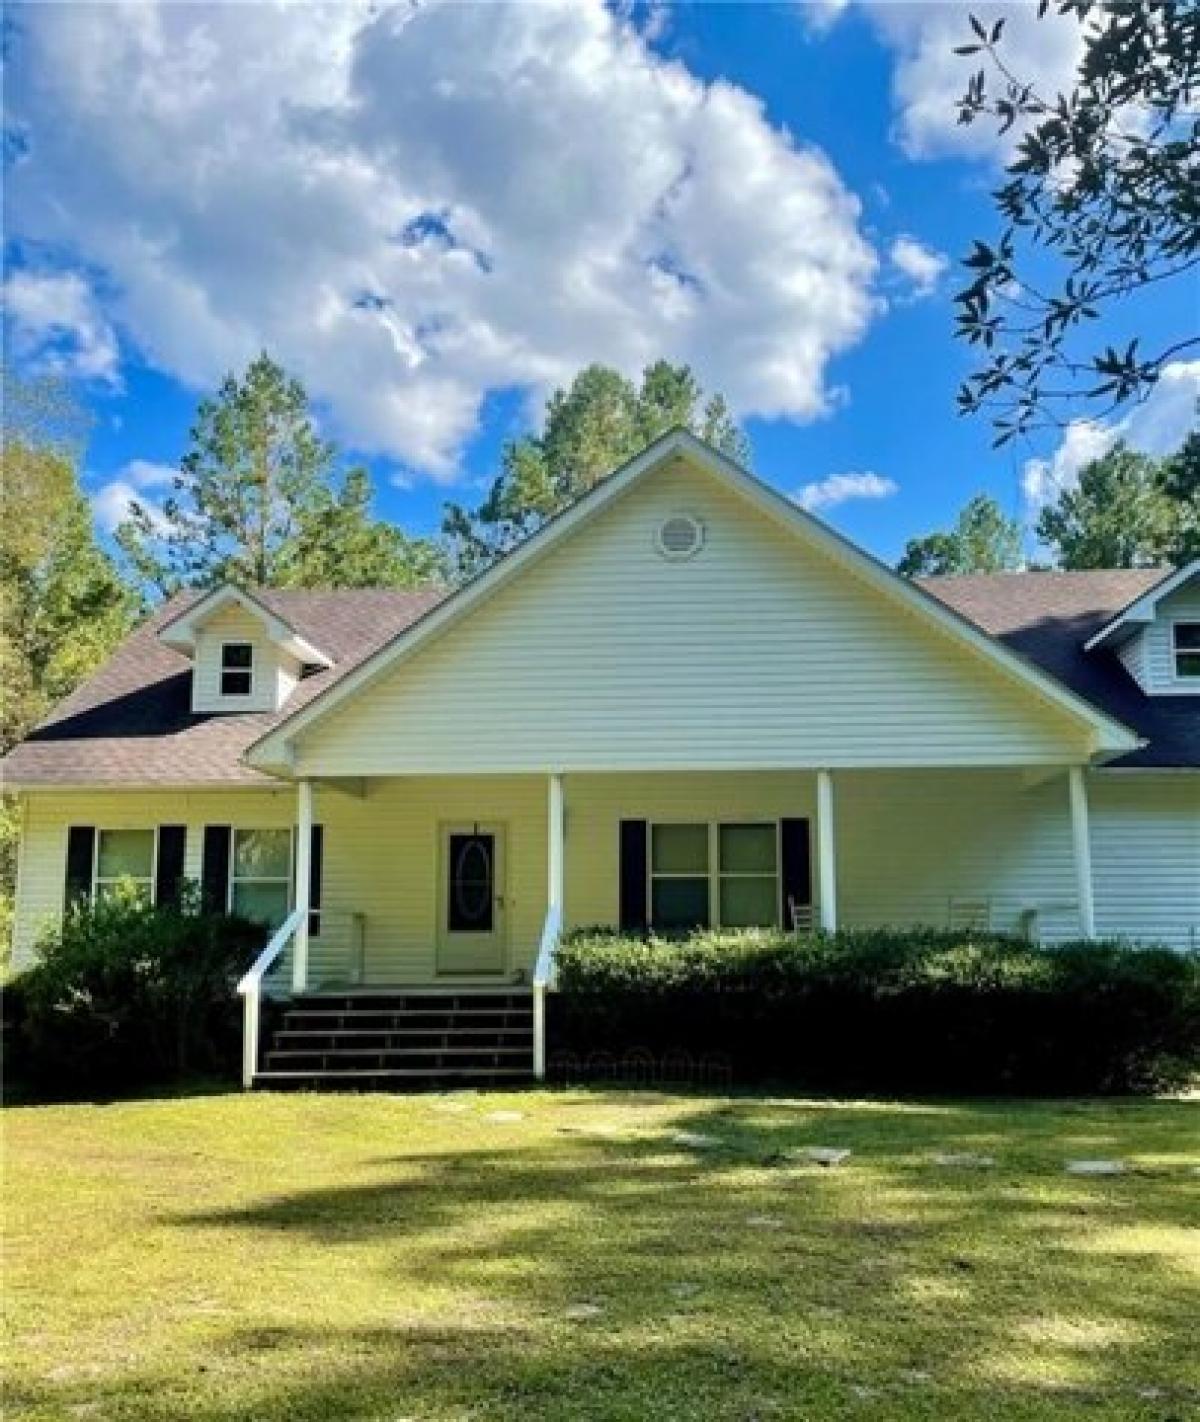 Picture of Home For Sale in Waverly, Georgia, United States